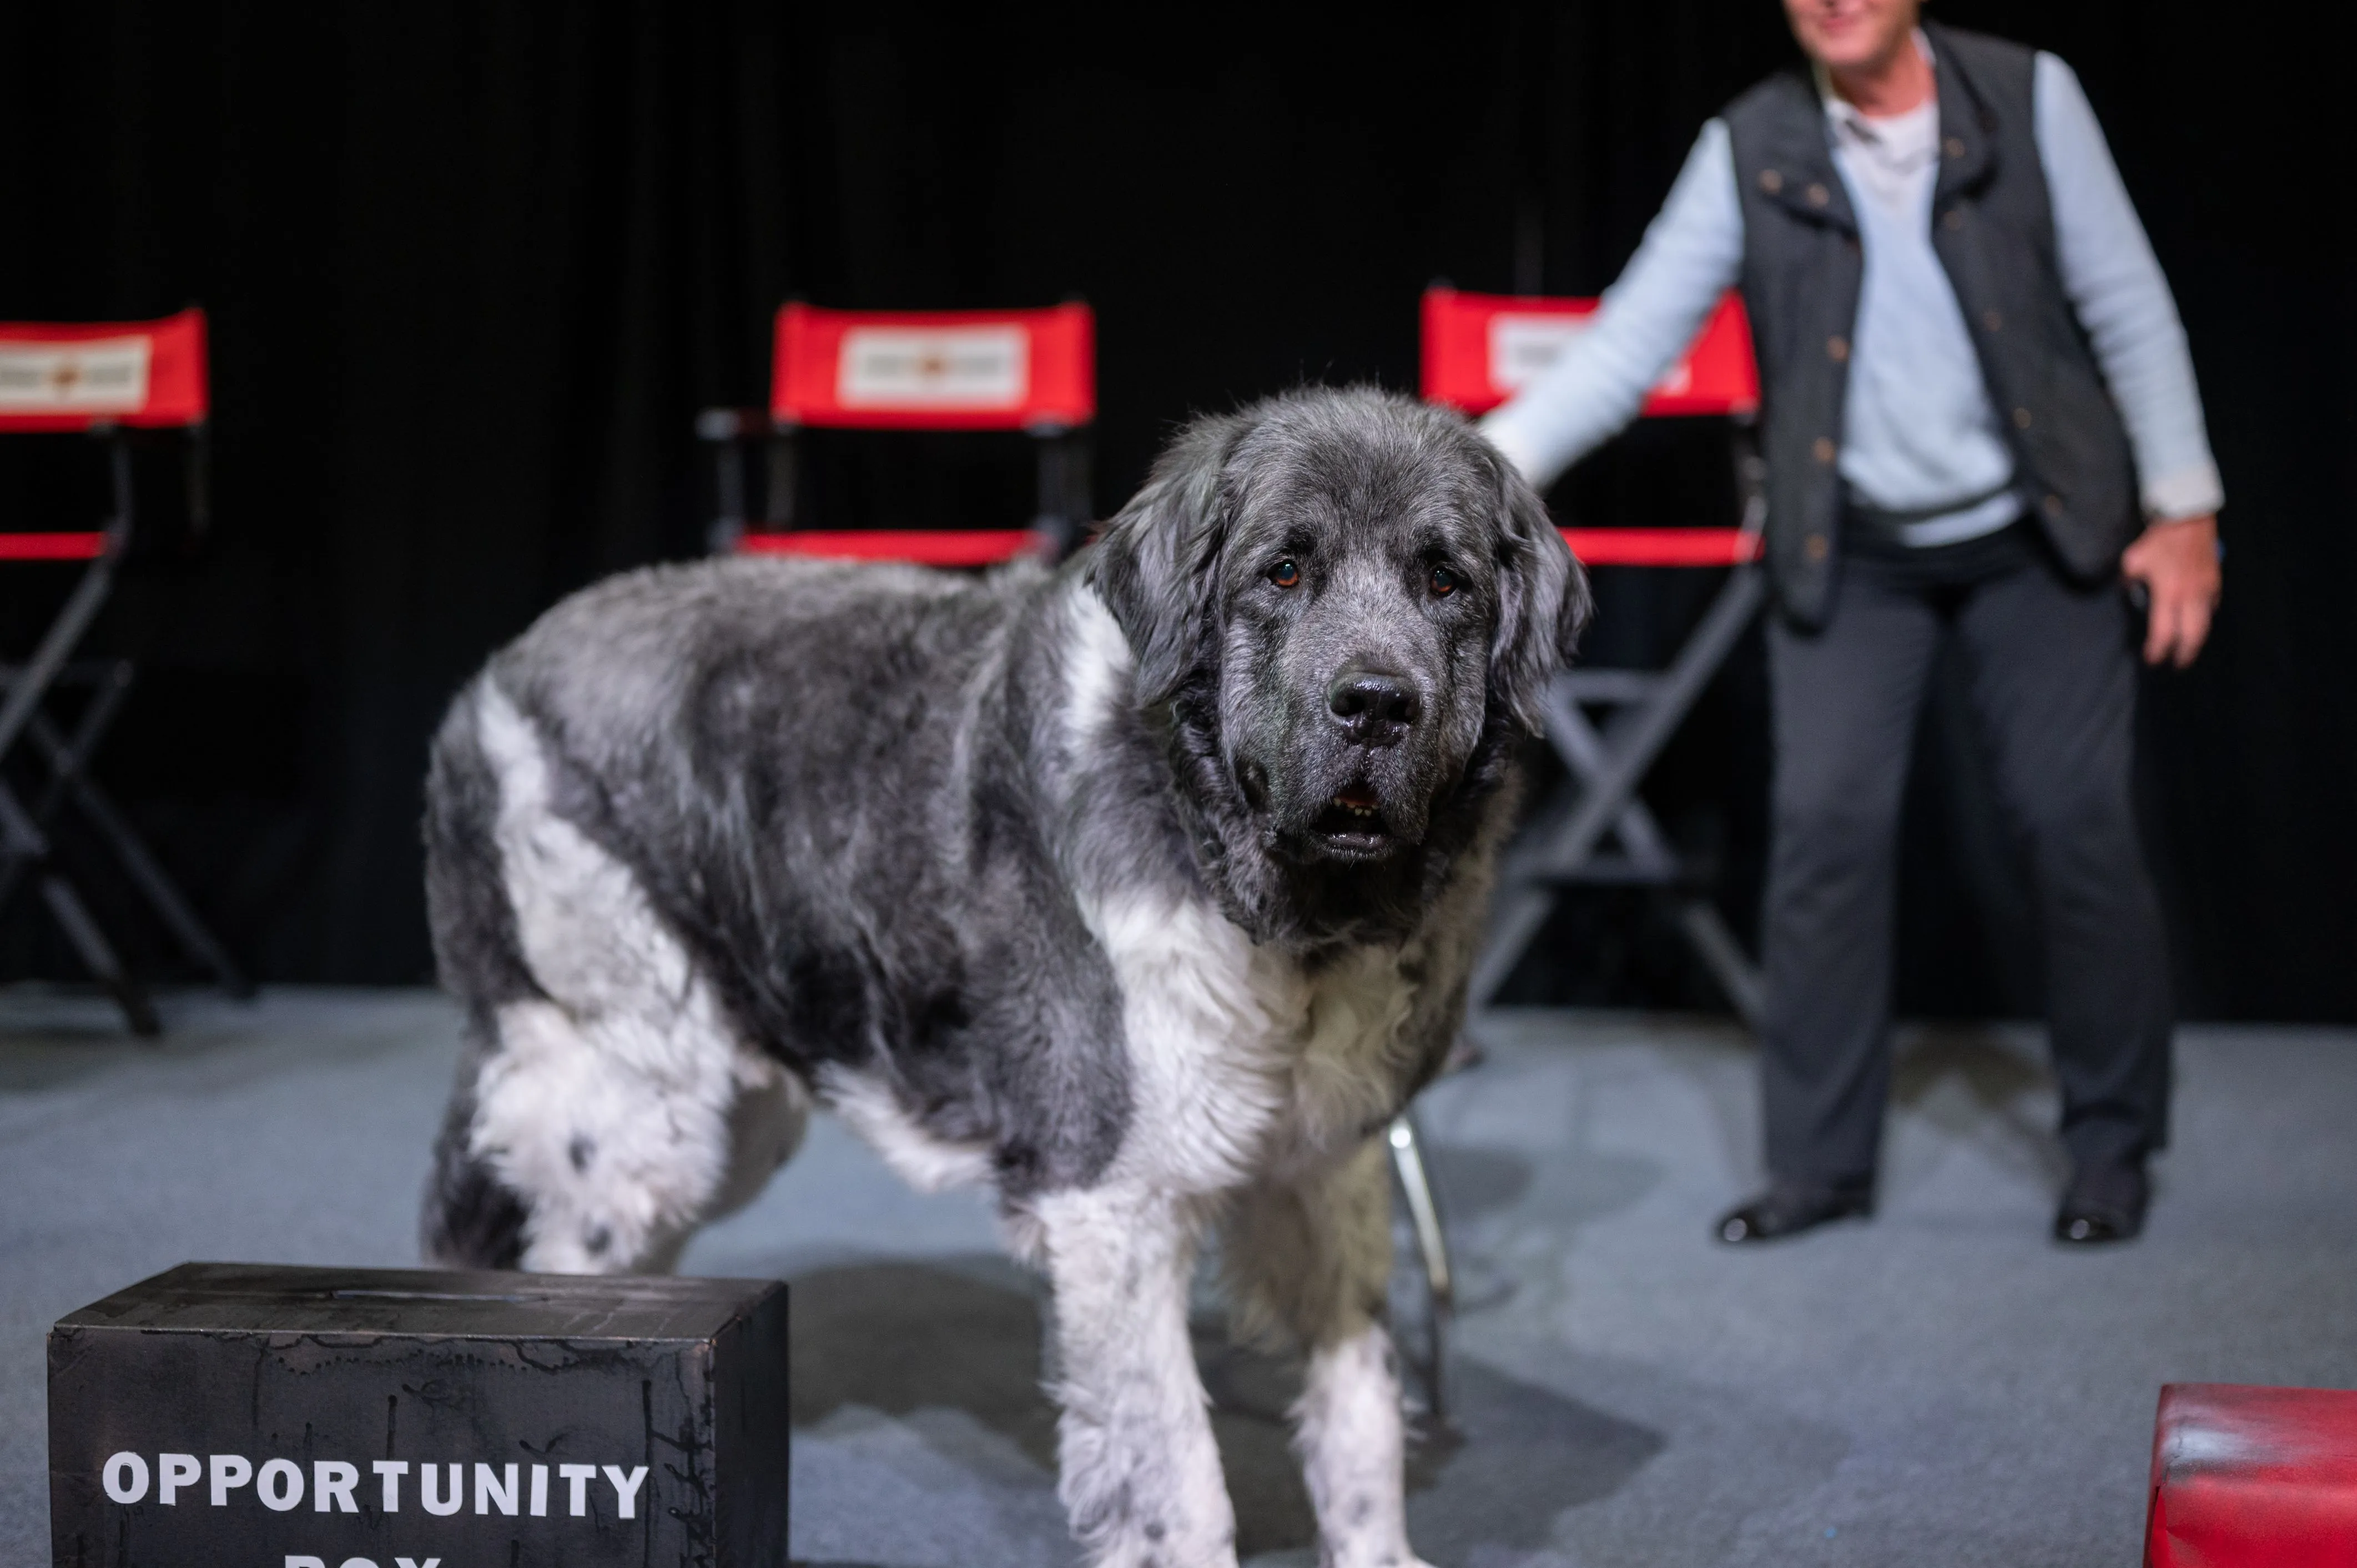 Large dog in the foreground on stage with "OPPORTUNITY" sign, handler in background.